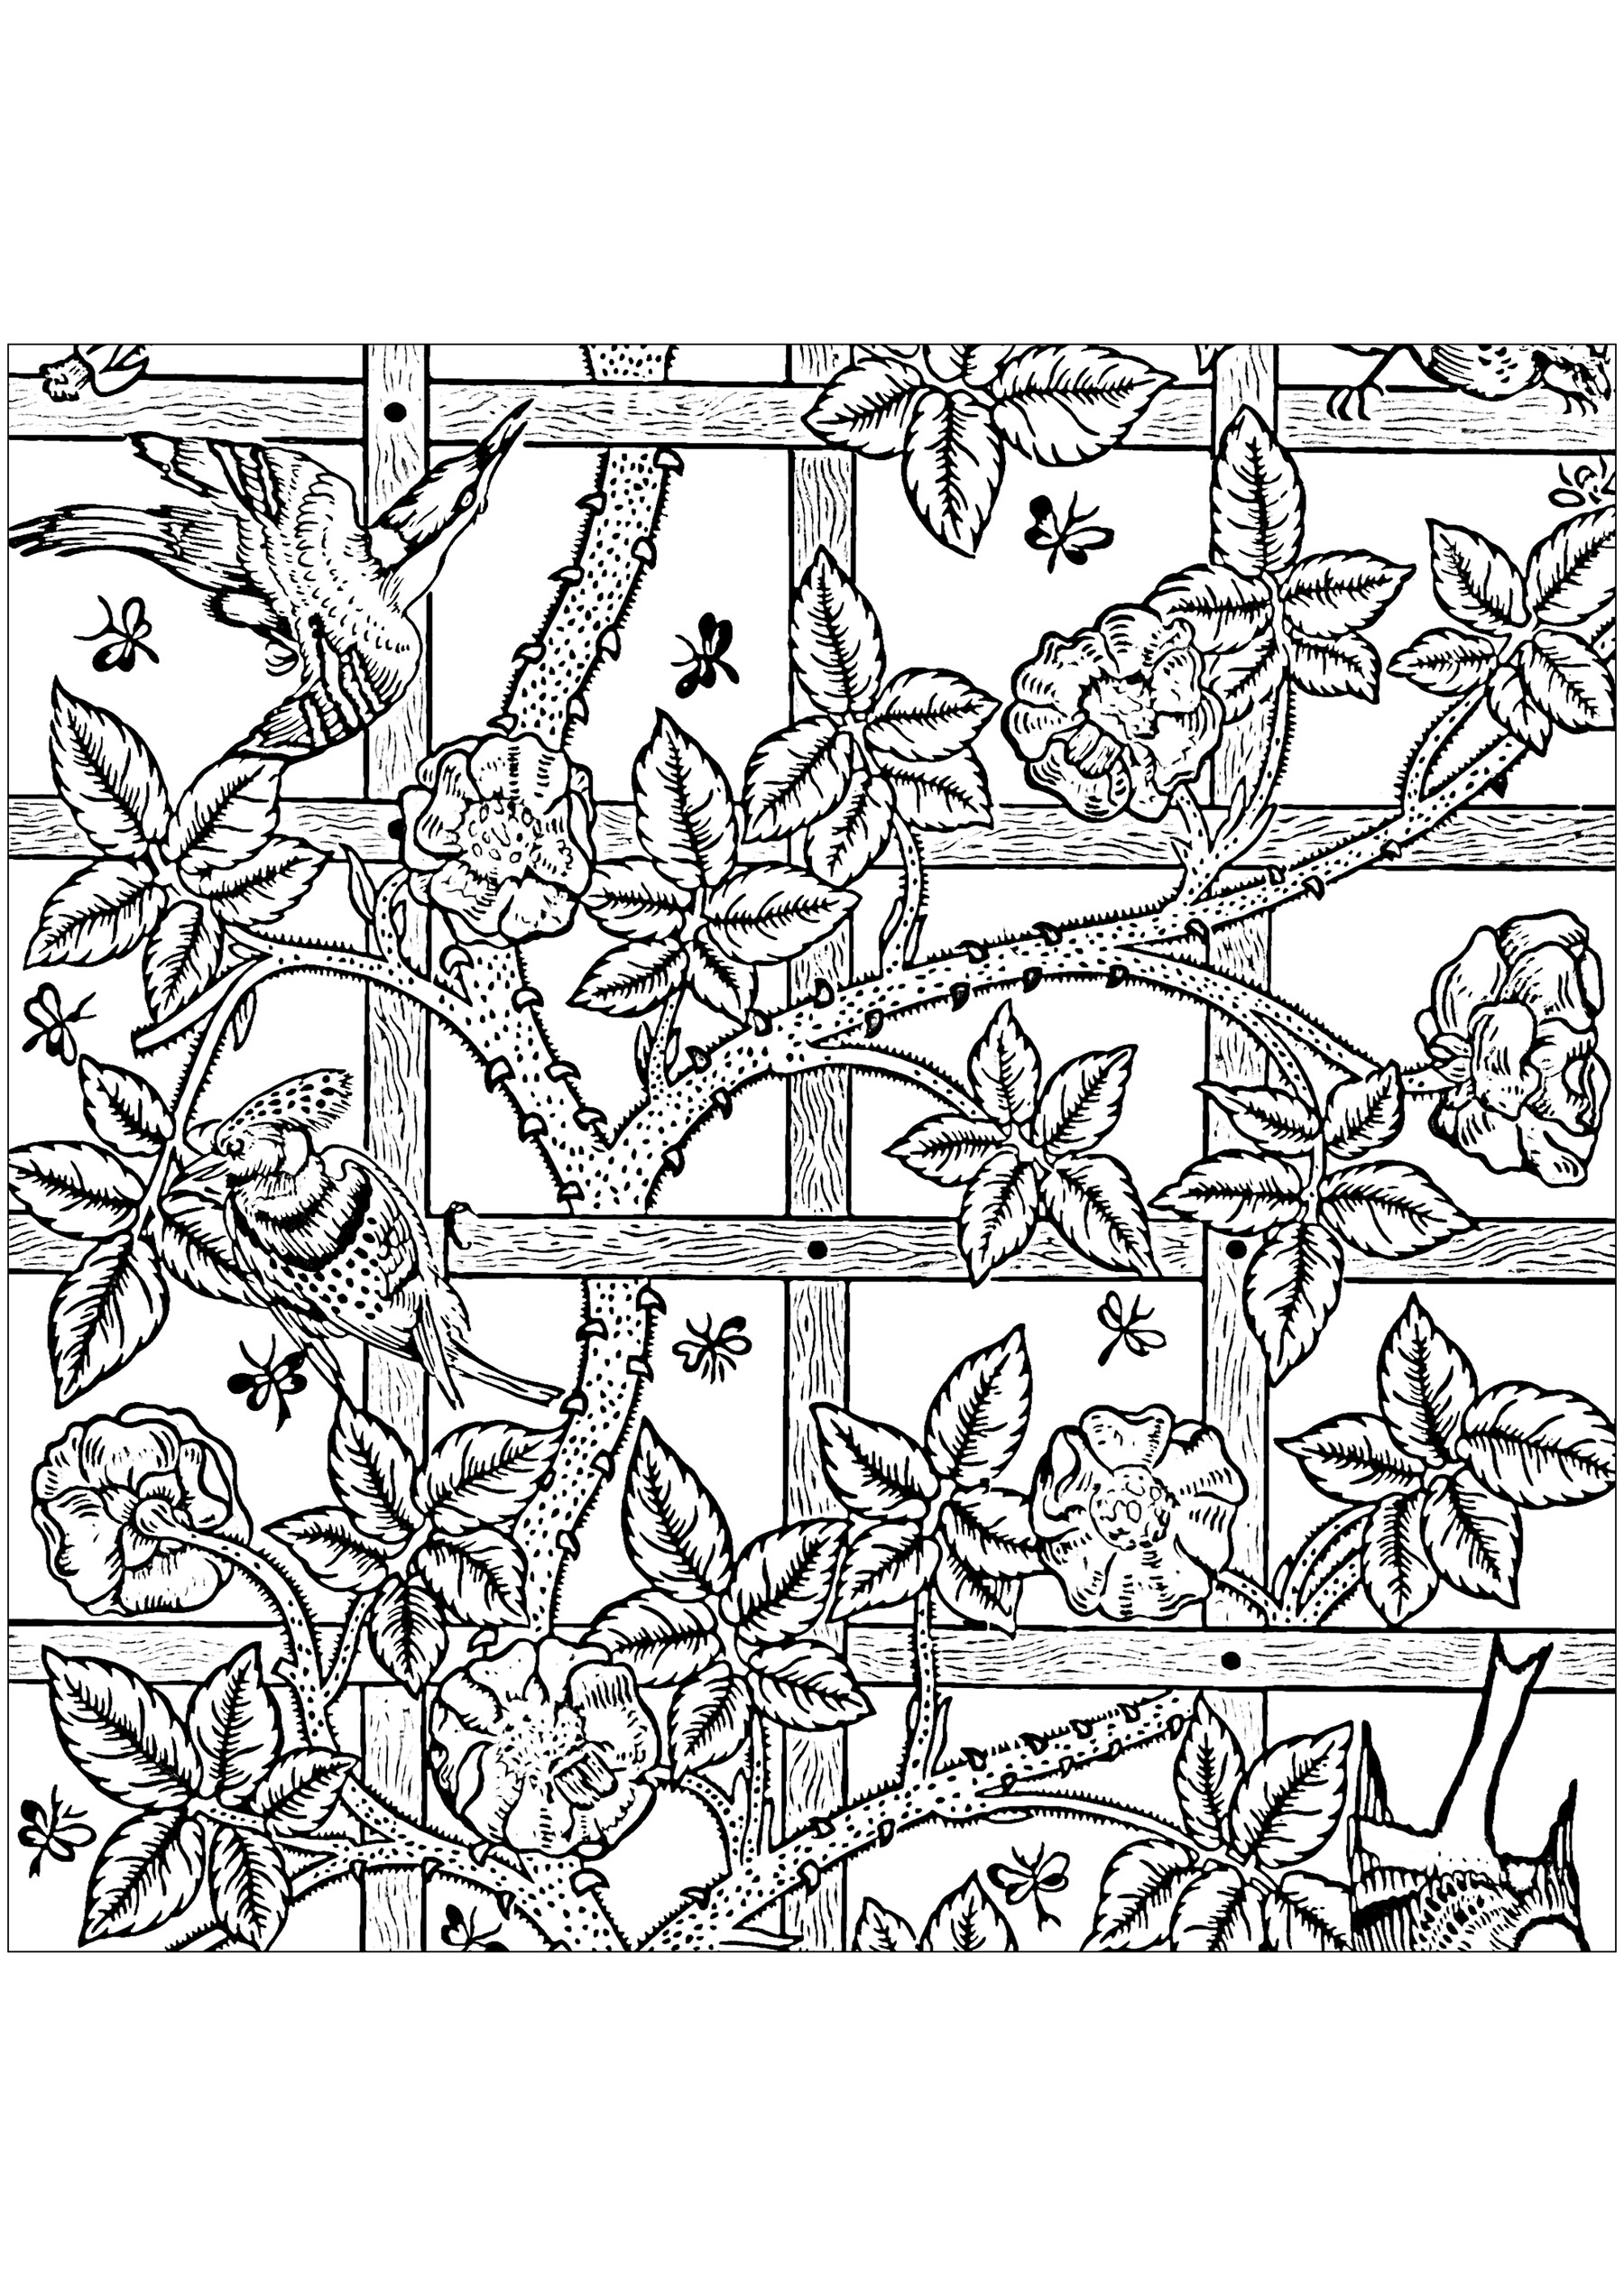 Coloring page created from the wallpaper pattern created by William Morris: 'Trellis' in 1864. In Britain, paper printed with patterns has been used for decorating walls since the 16th century. By the late 19th century wallpapers were widely used in homes and public buildings. William Morris designed a number of wallpapers, all with repeating patterns based on natural forms and animals.